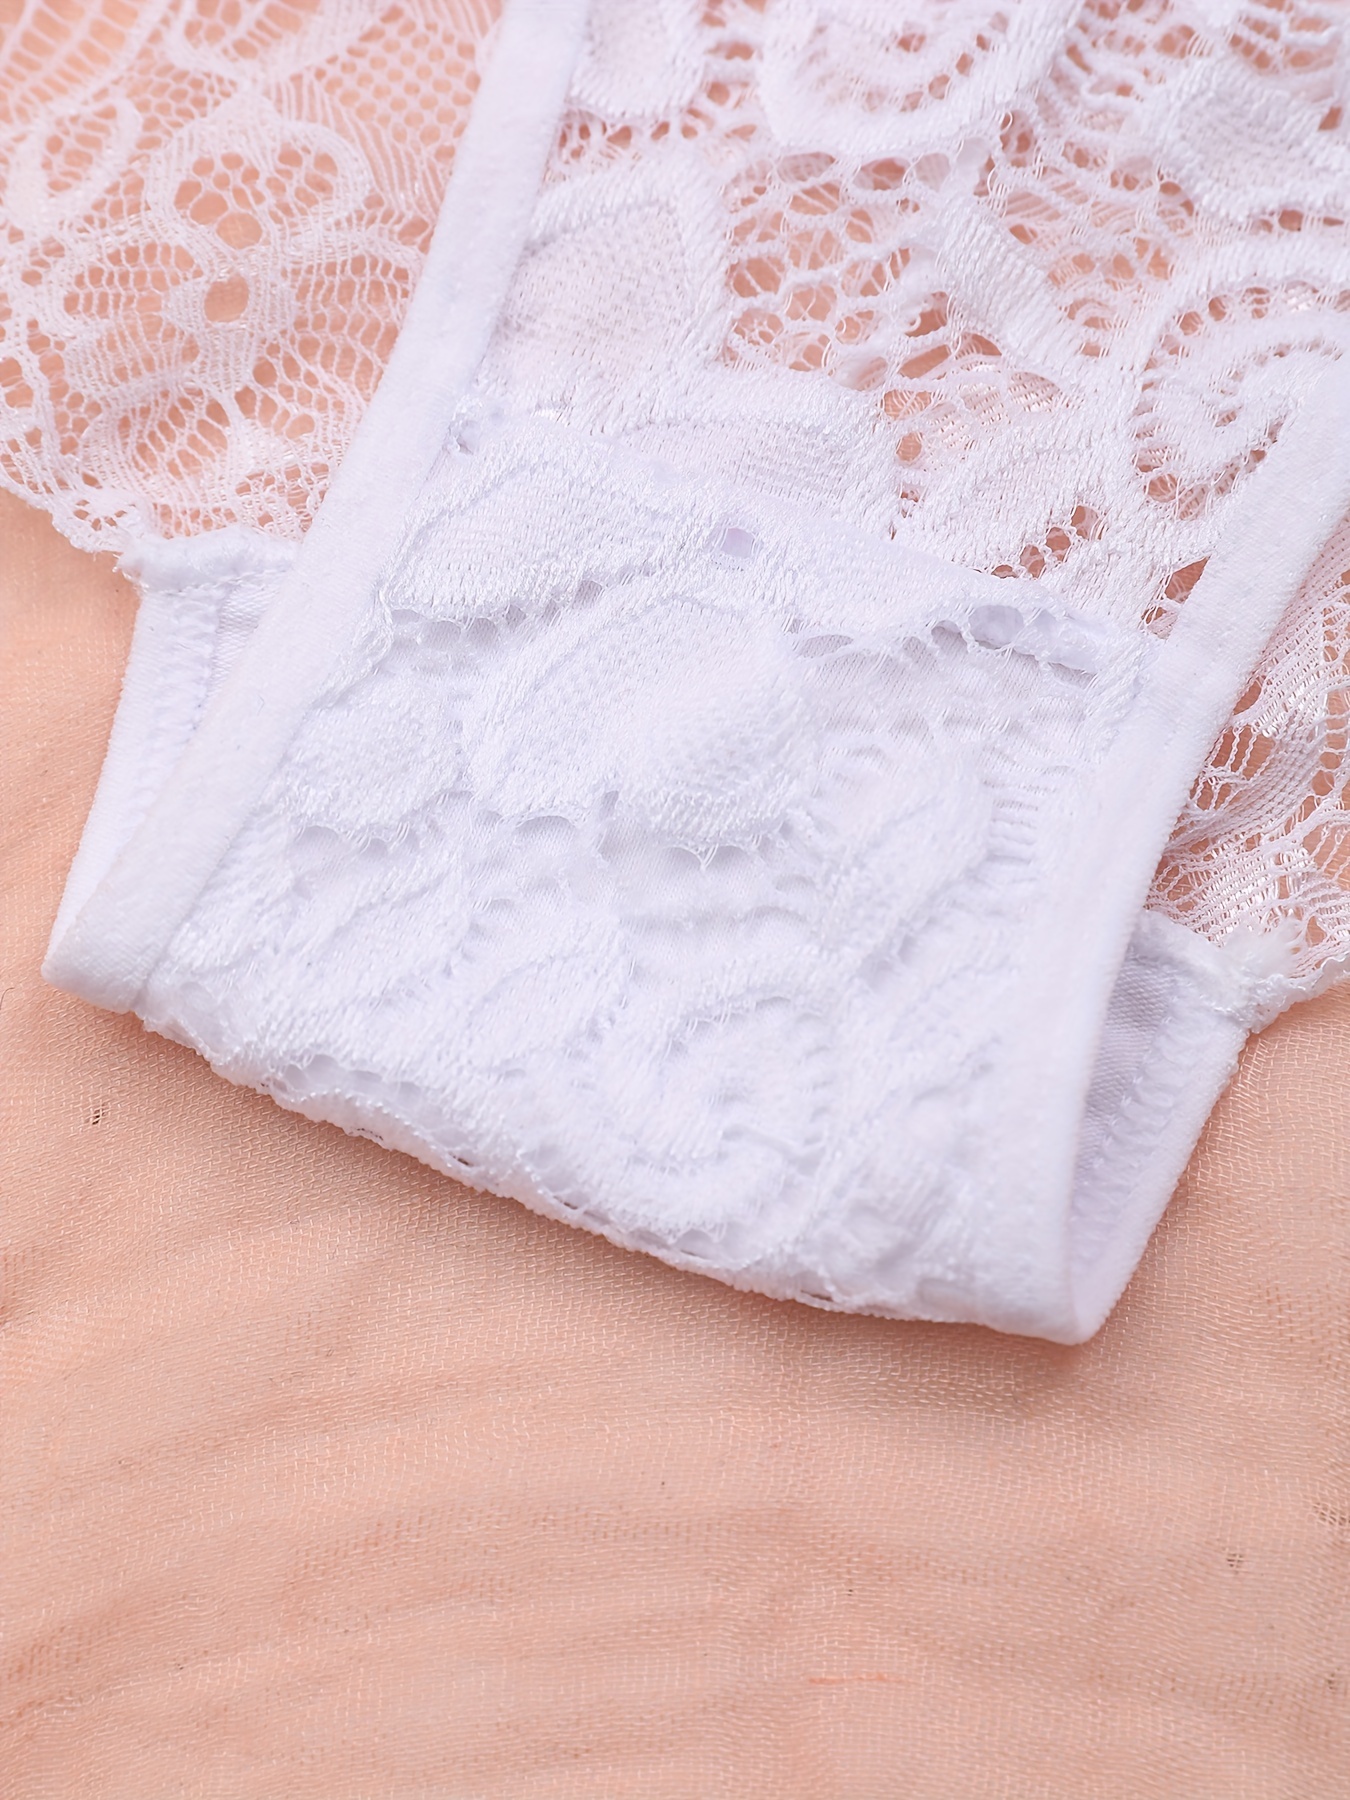 NWT LA SENZA SMALL WHITE BOW GOLD SHIMMER FLORAL LACE WAISTBAND HIPSTER  PANTIES